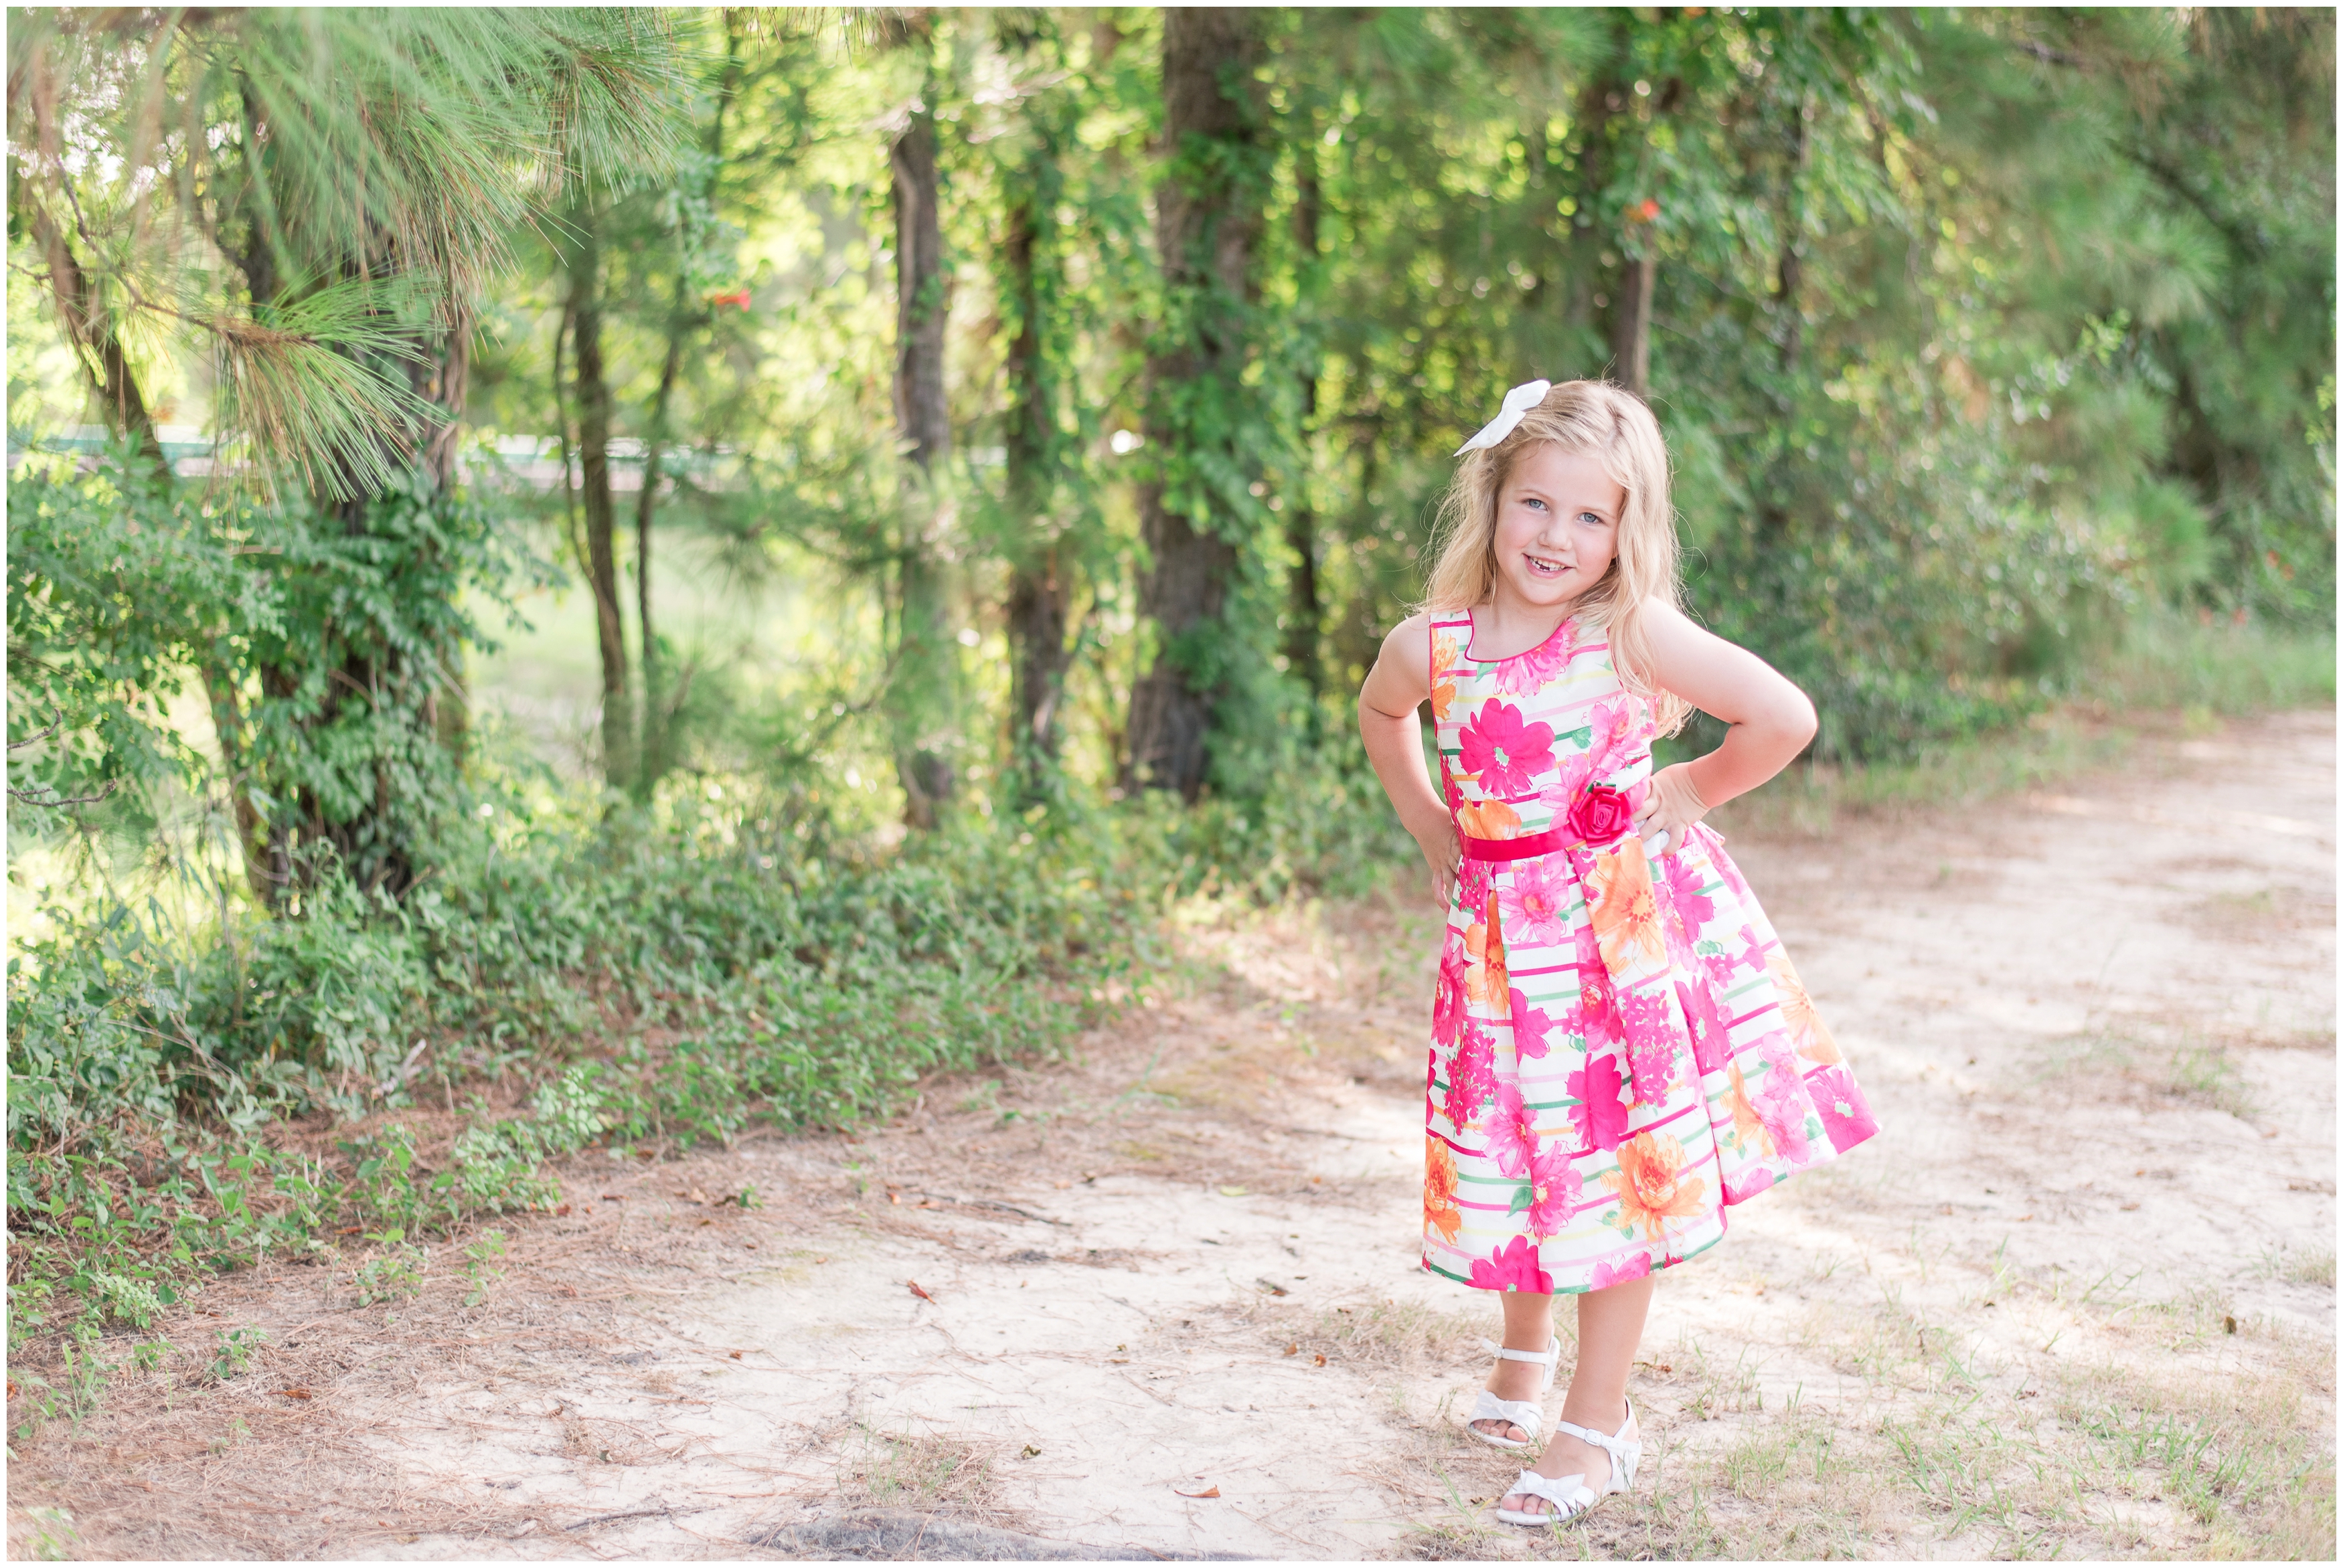 Kingwood photographer - Letter to daughter, Peanut, on her 5th birthday